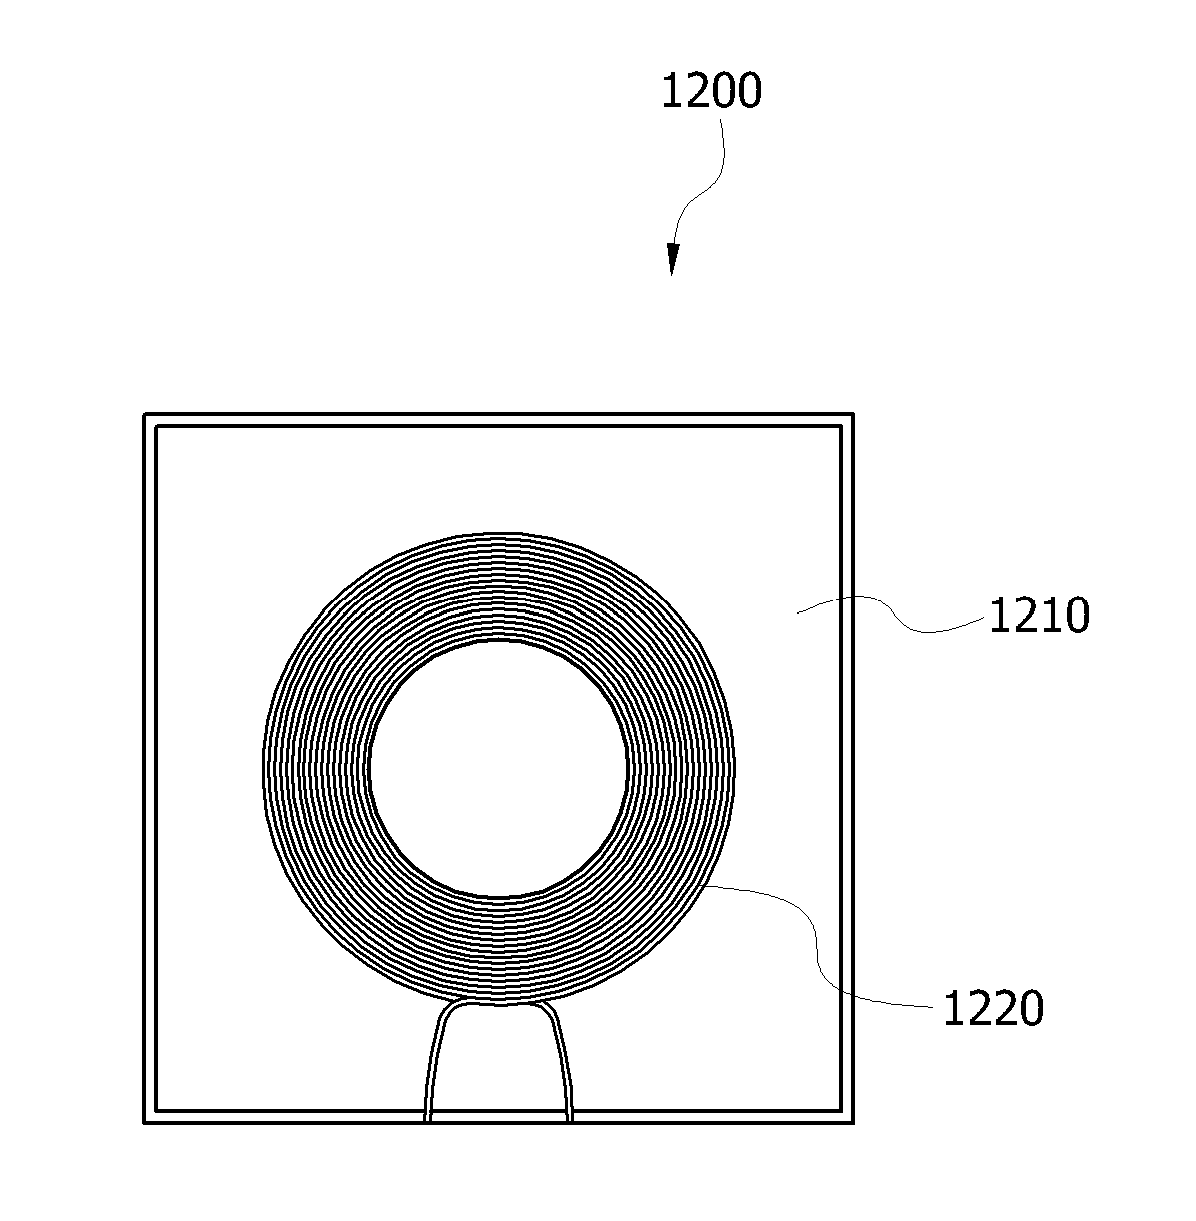 Soft Magnetic Alloy, Wireless Power Transmitting Apparatus, and Wireless Power Receiving Apparatus Including the Same